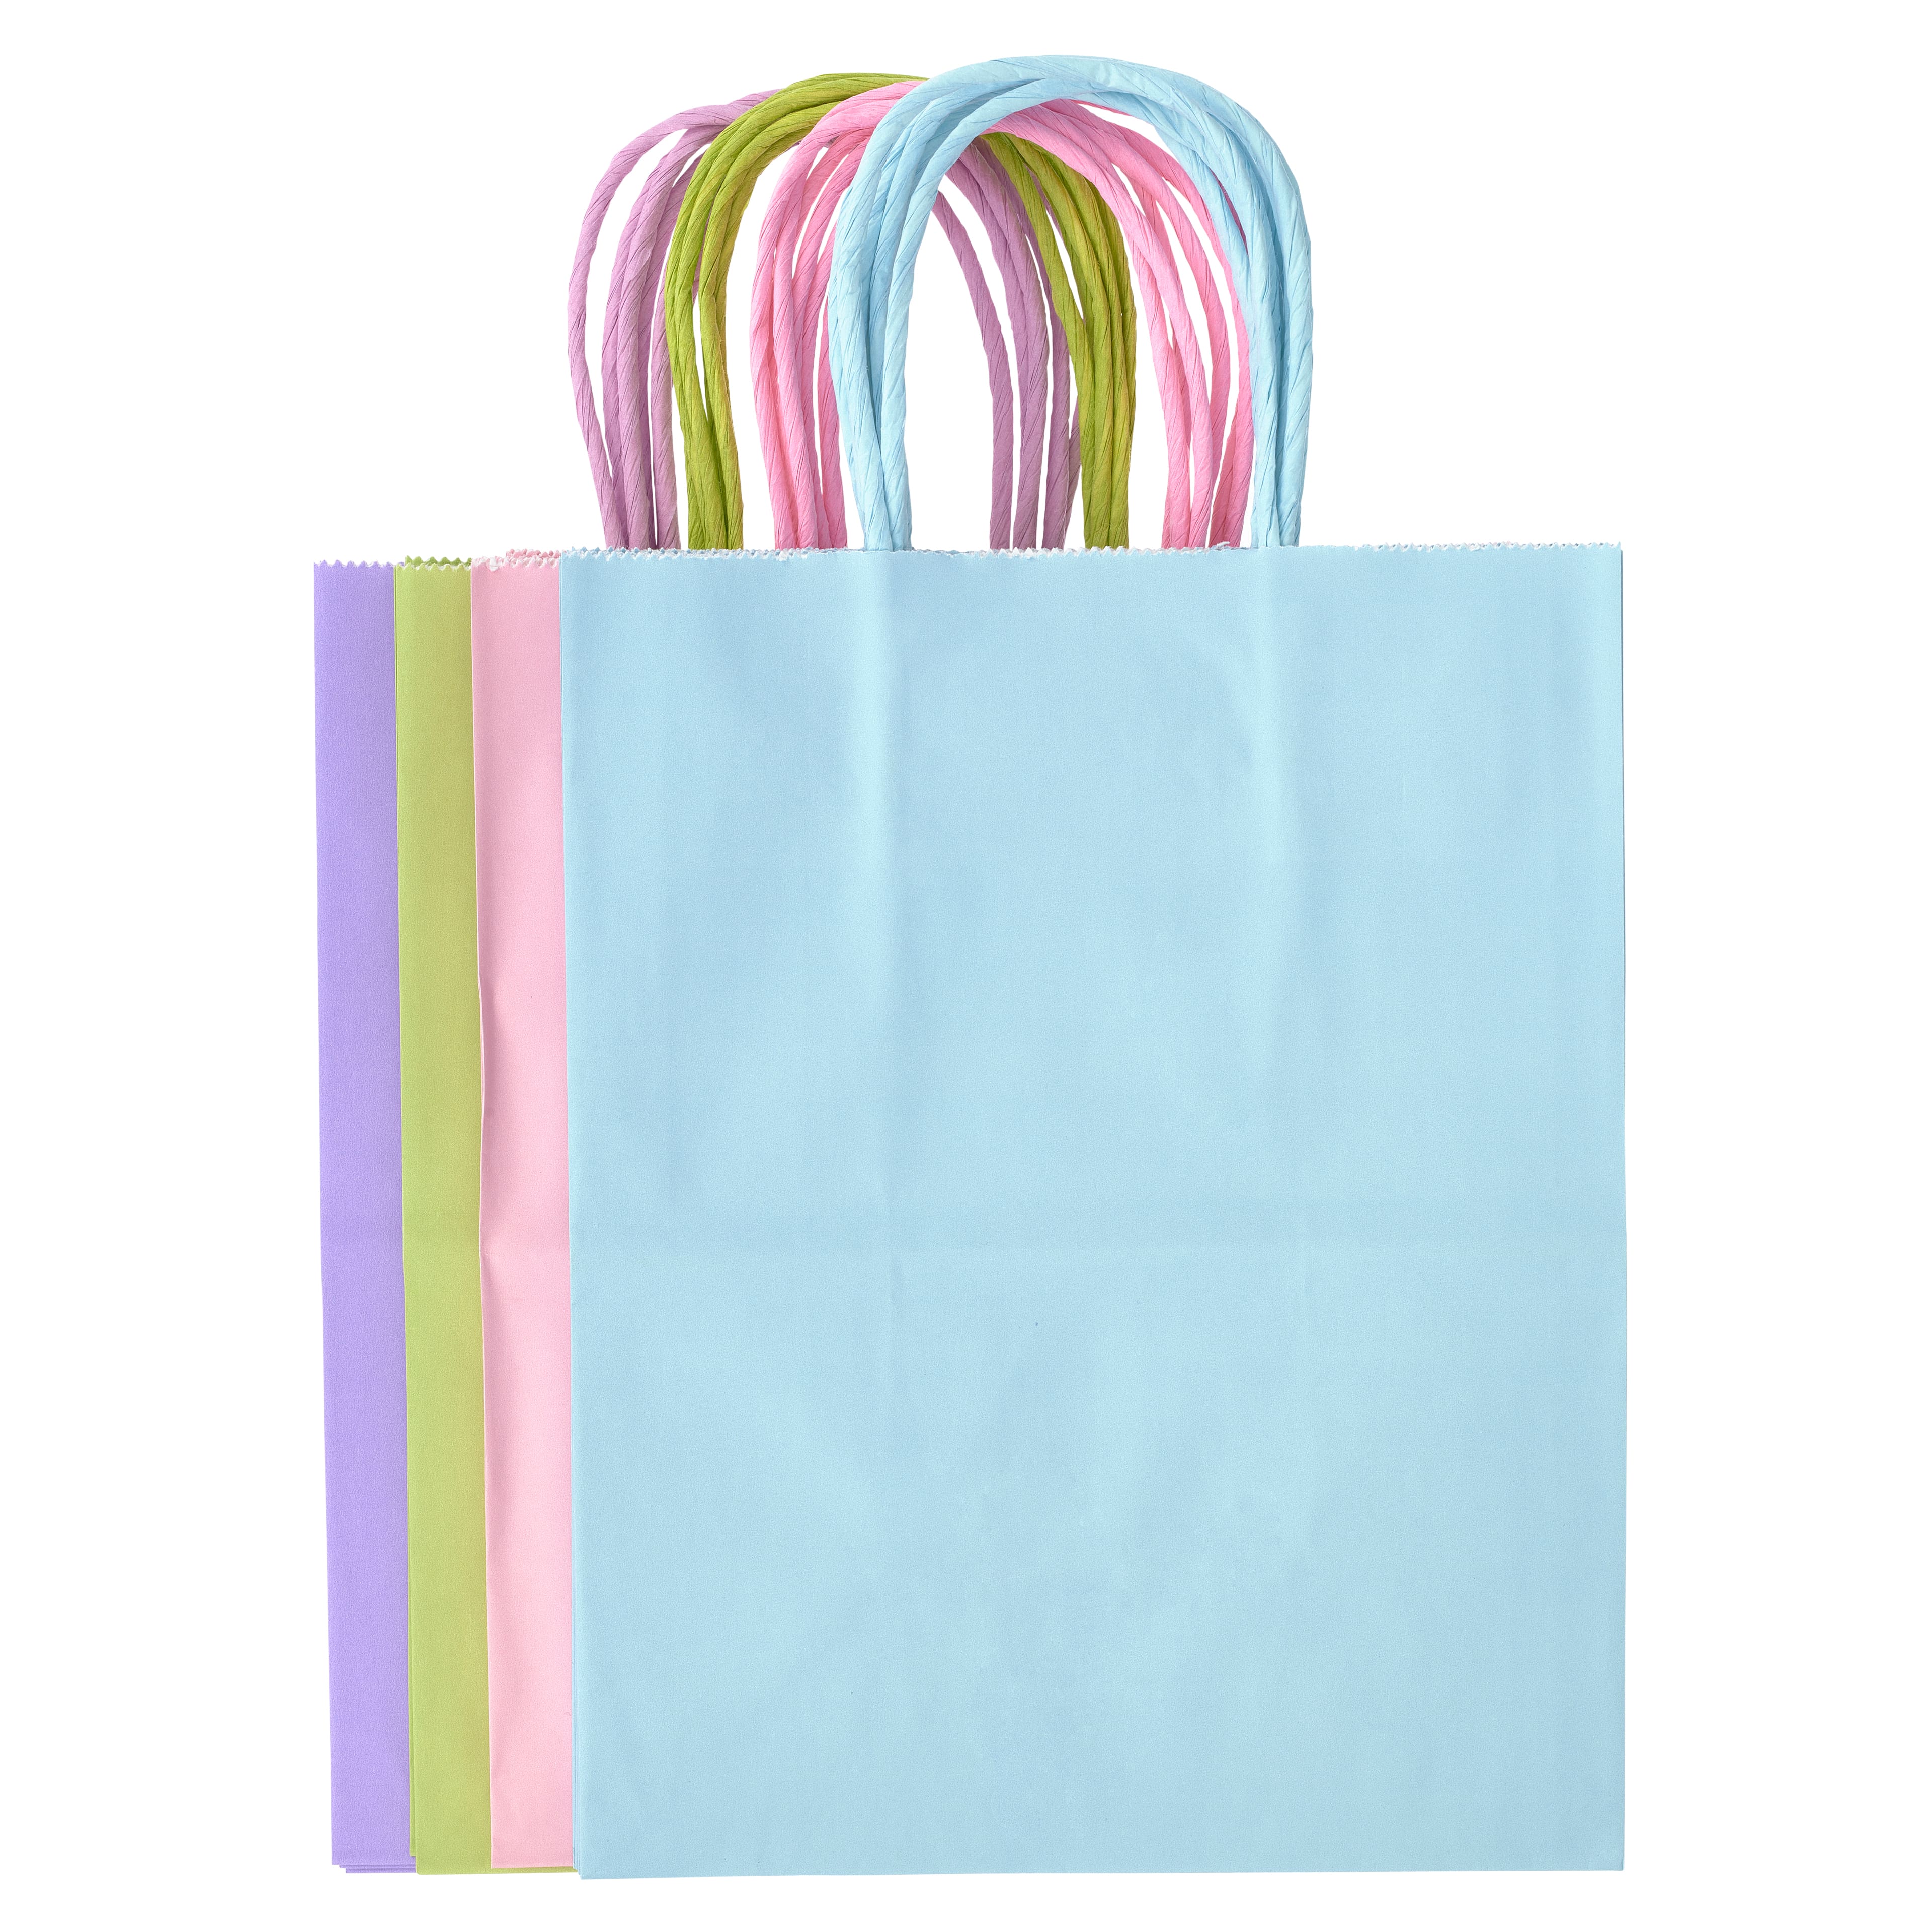 Pastel Assorted Bags, 6 x 3 1/2 x 11, 28 bags - HYG66289